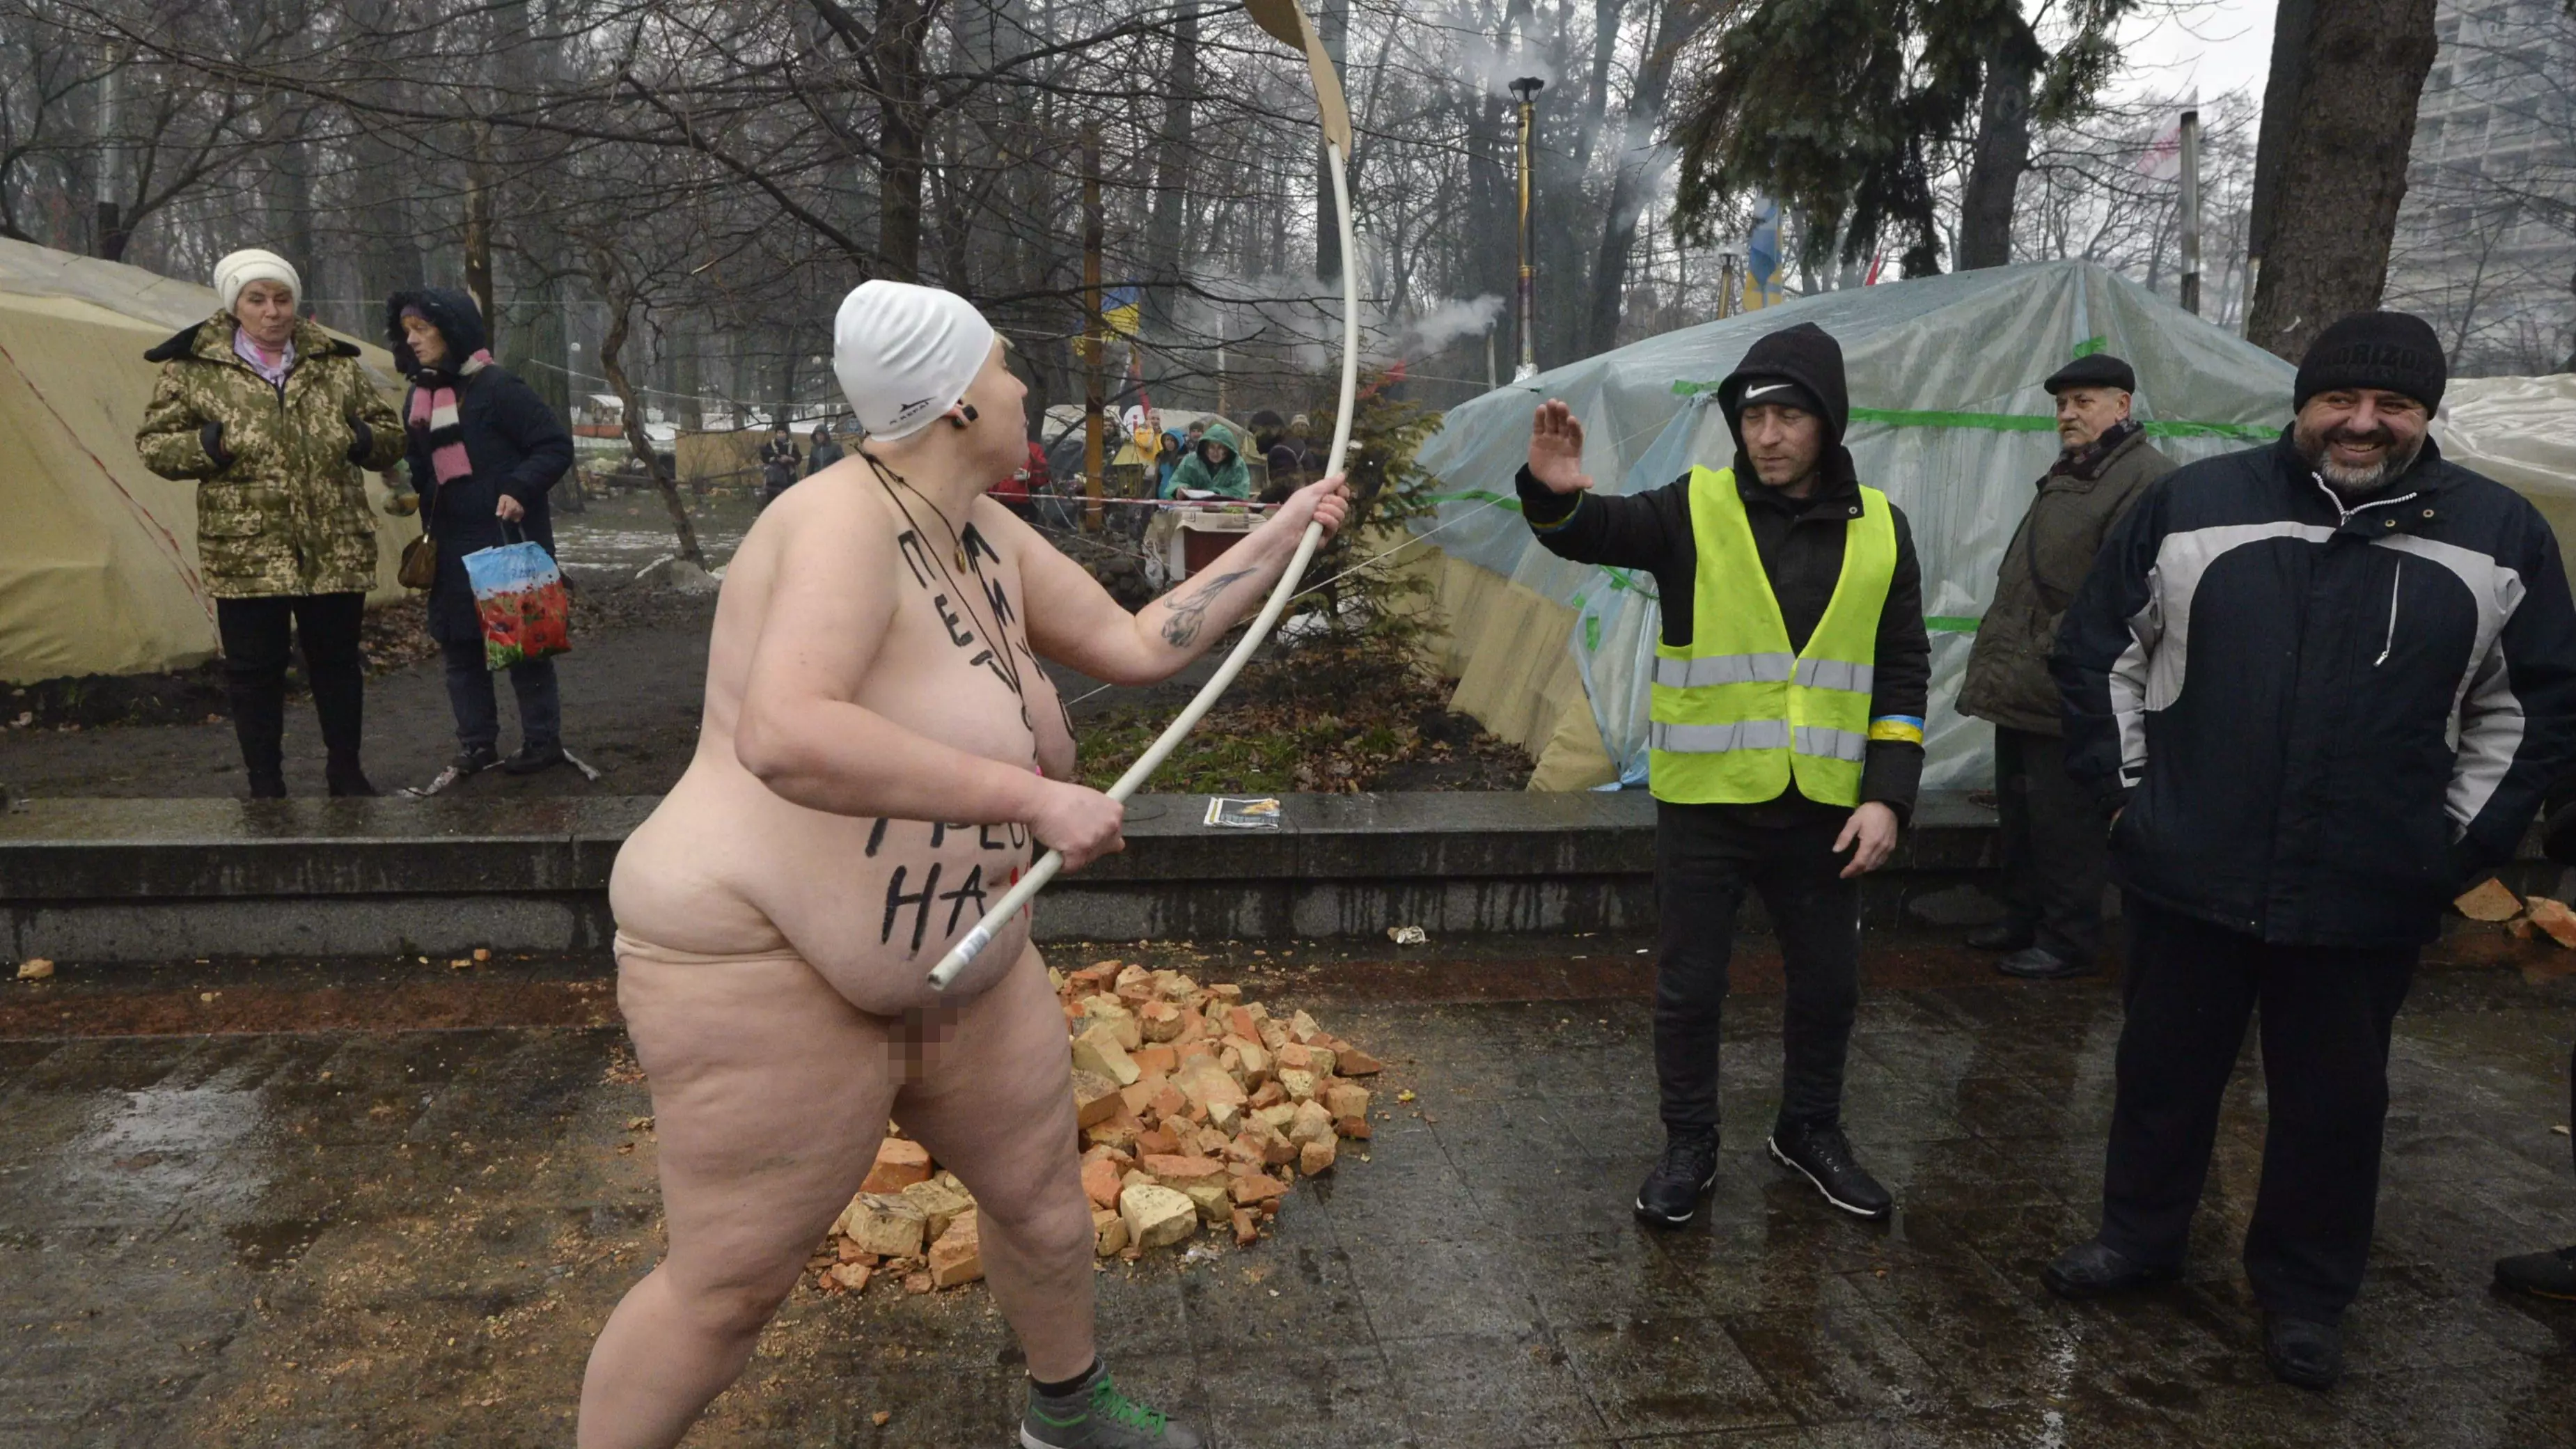 ​Naked Woman With 'Row The F*** Away' Written On Body Arrested Outside Ukrainian Parliament